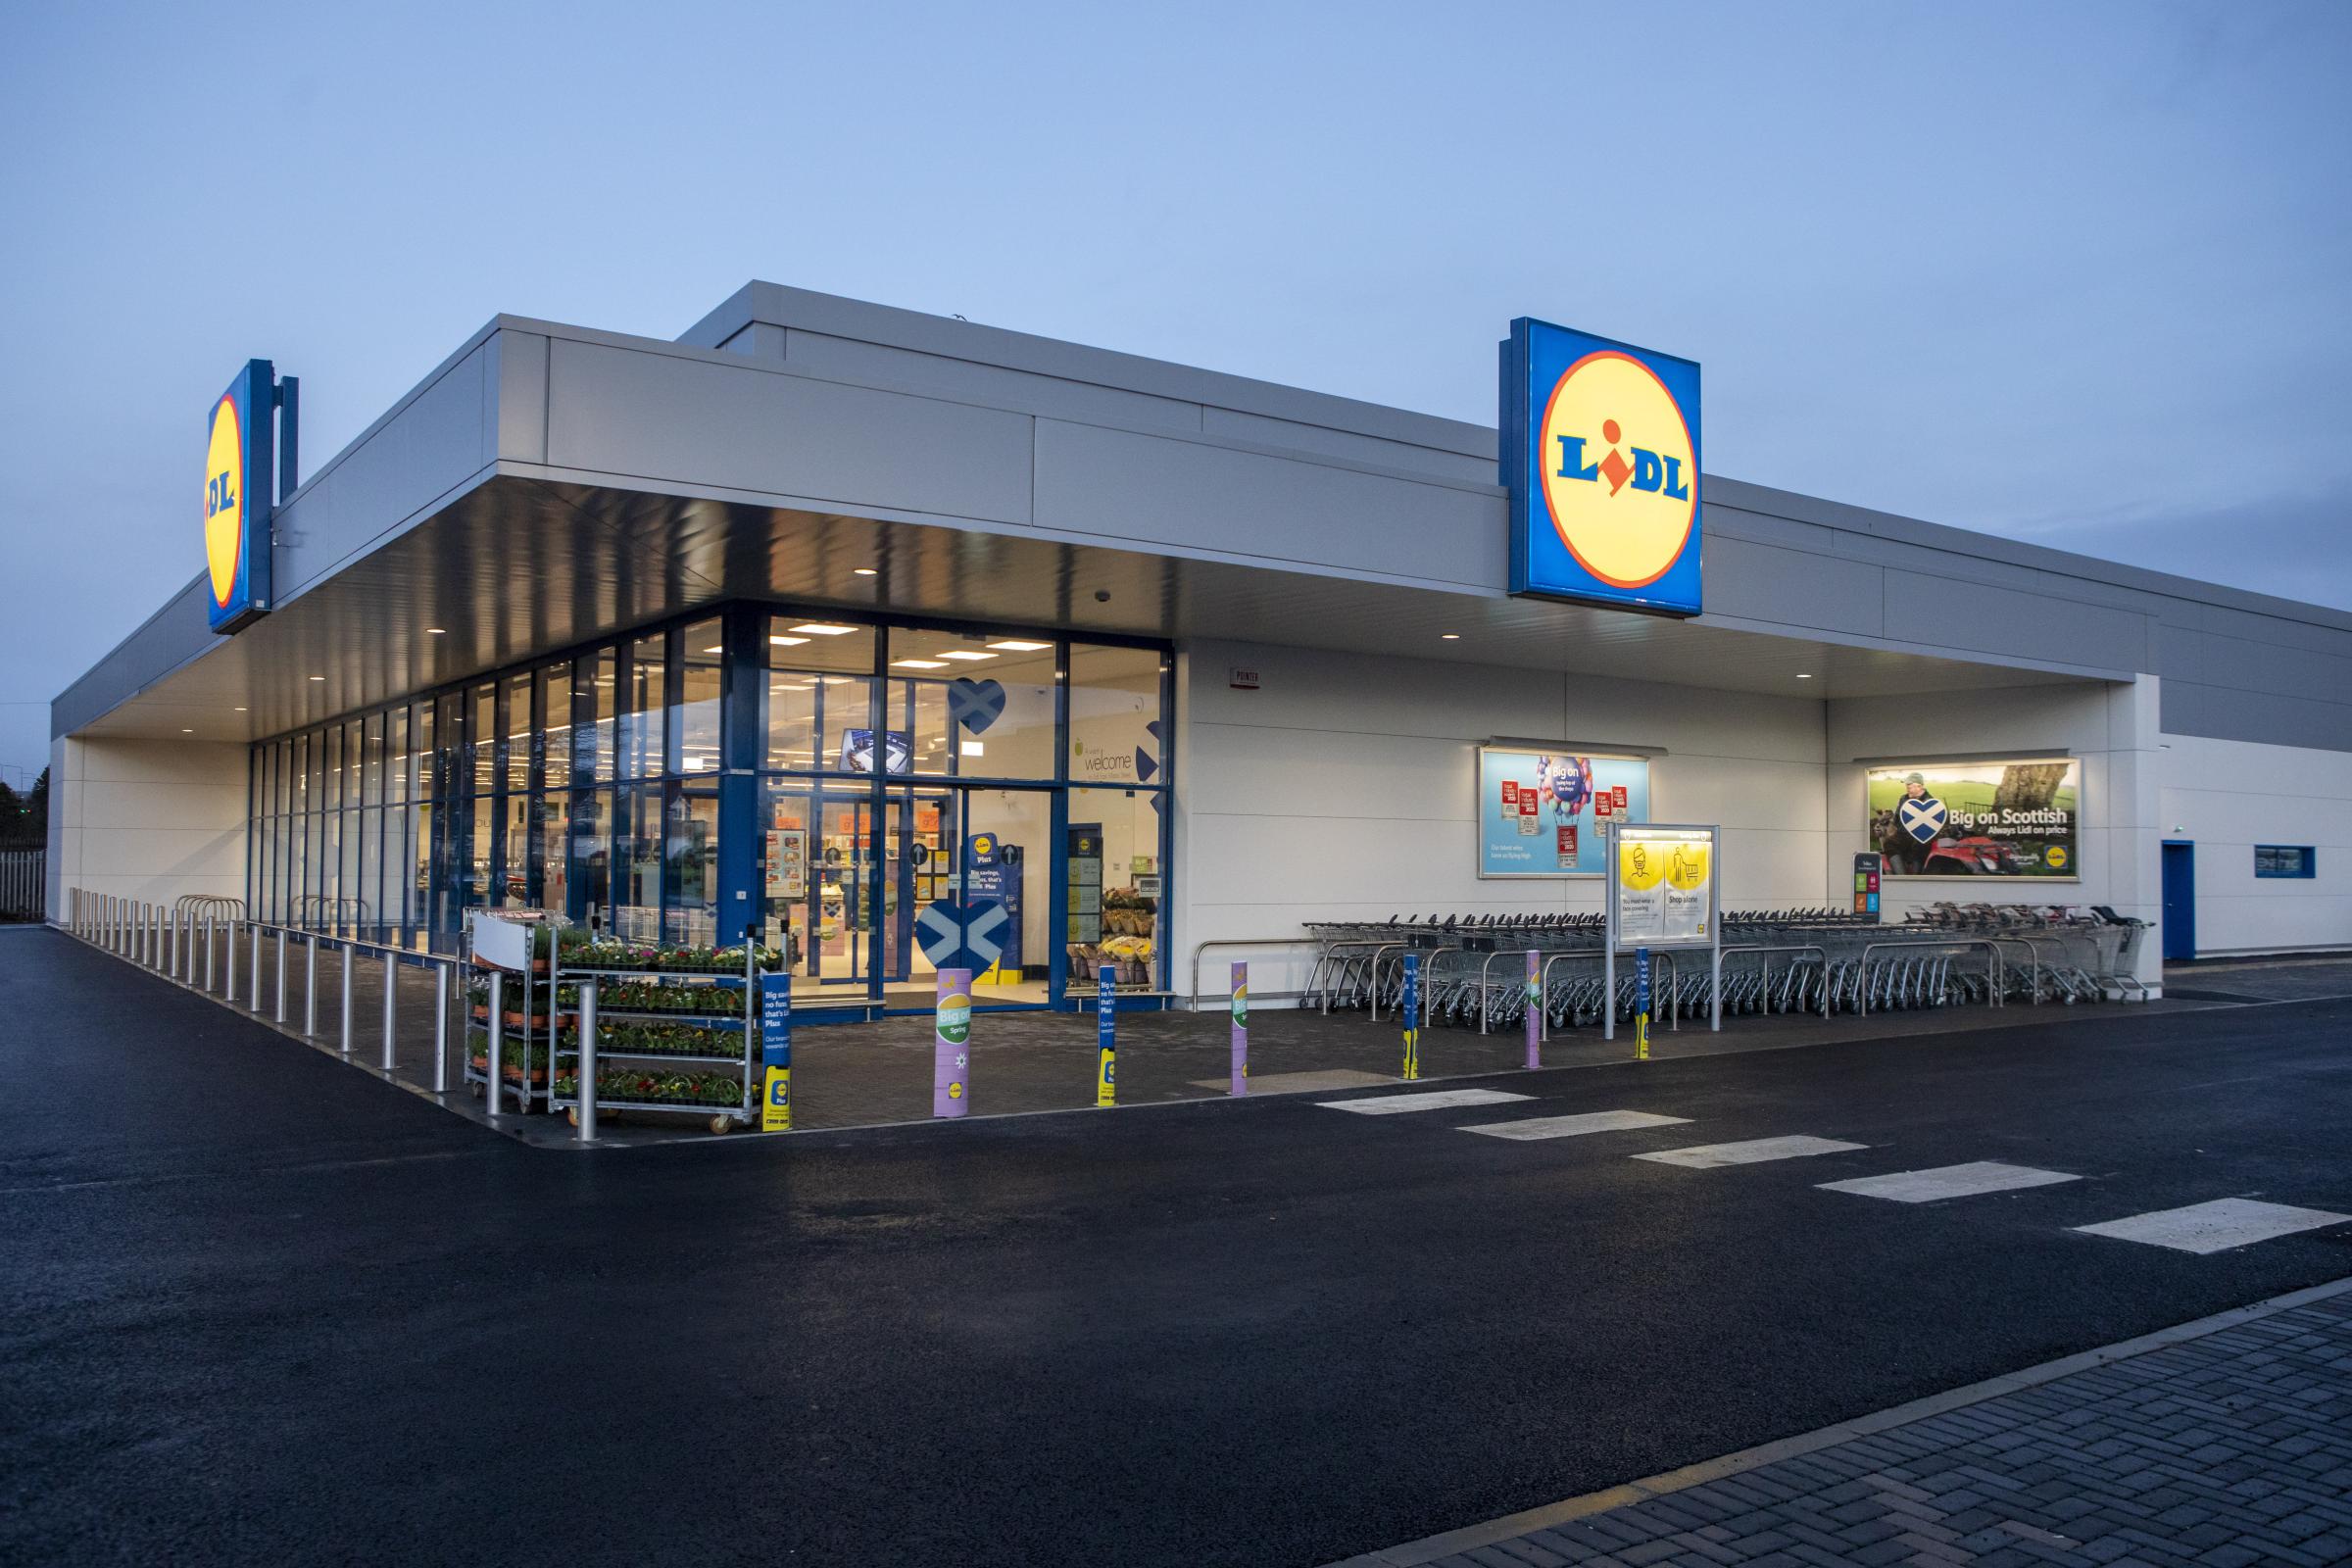 Supermarket chain Lidl reveal five Glasgow areas earmarked for a new store